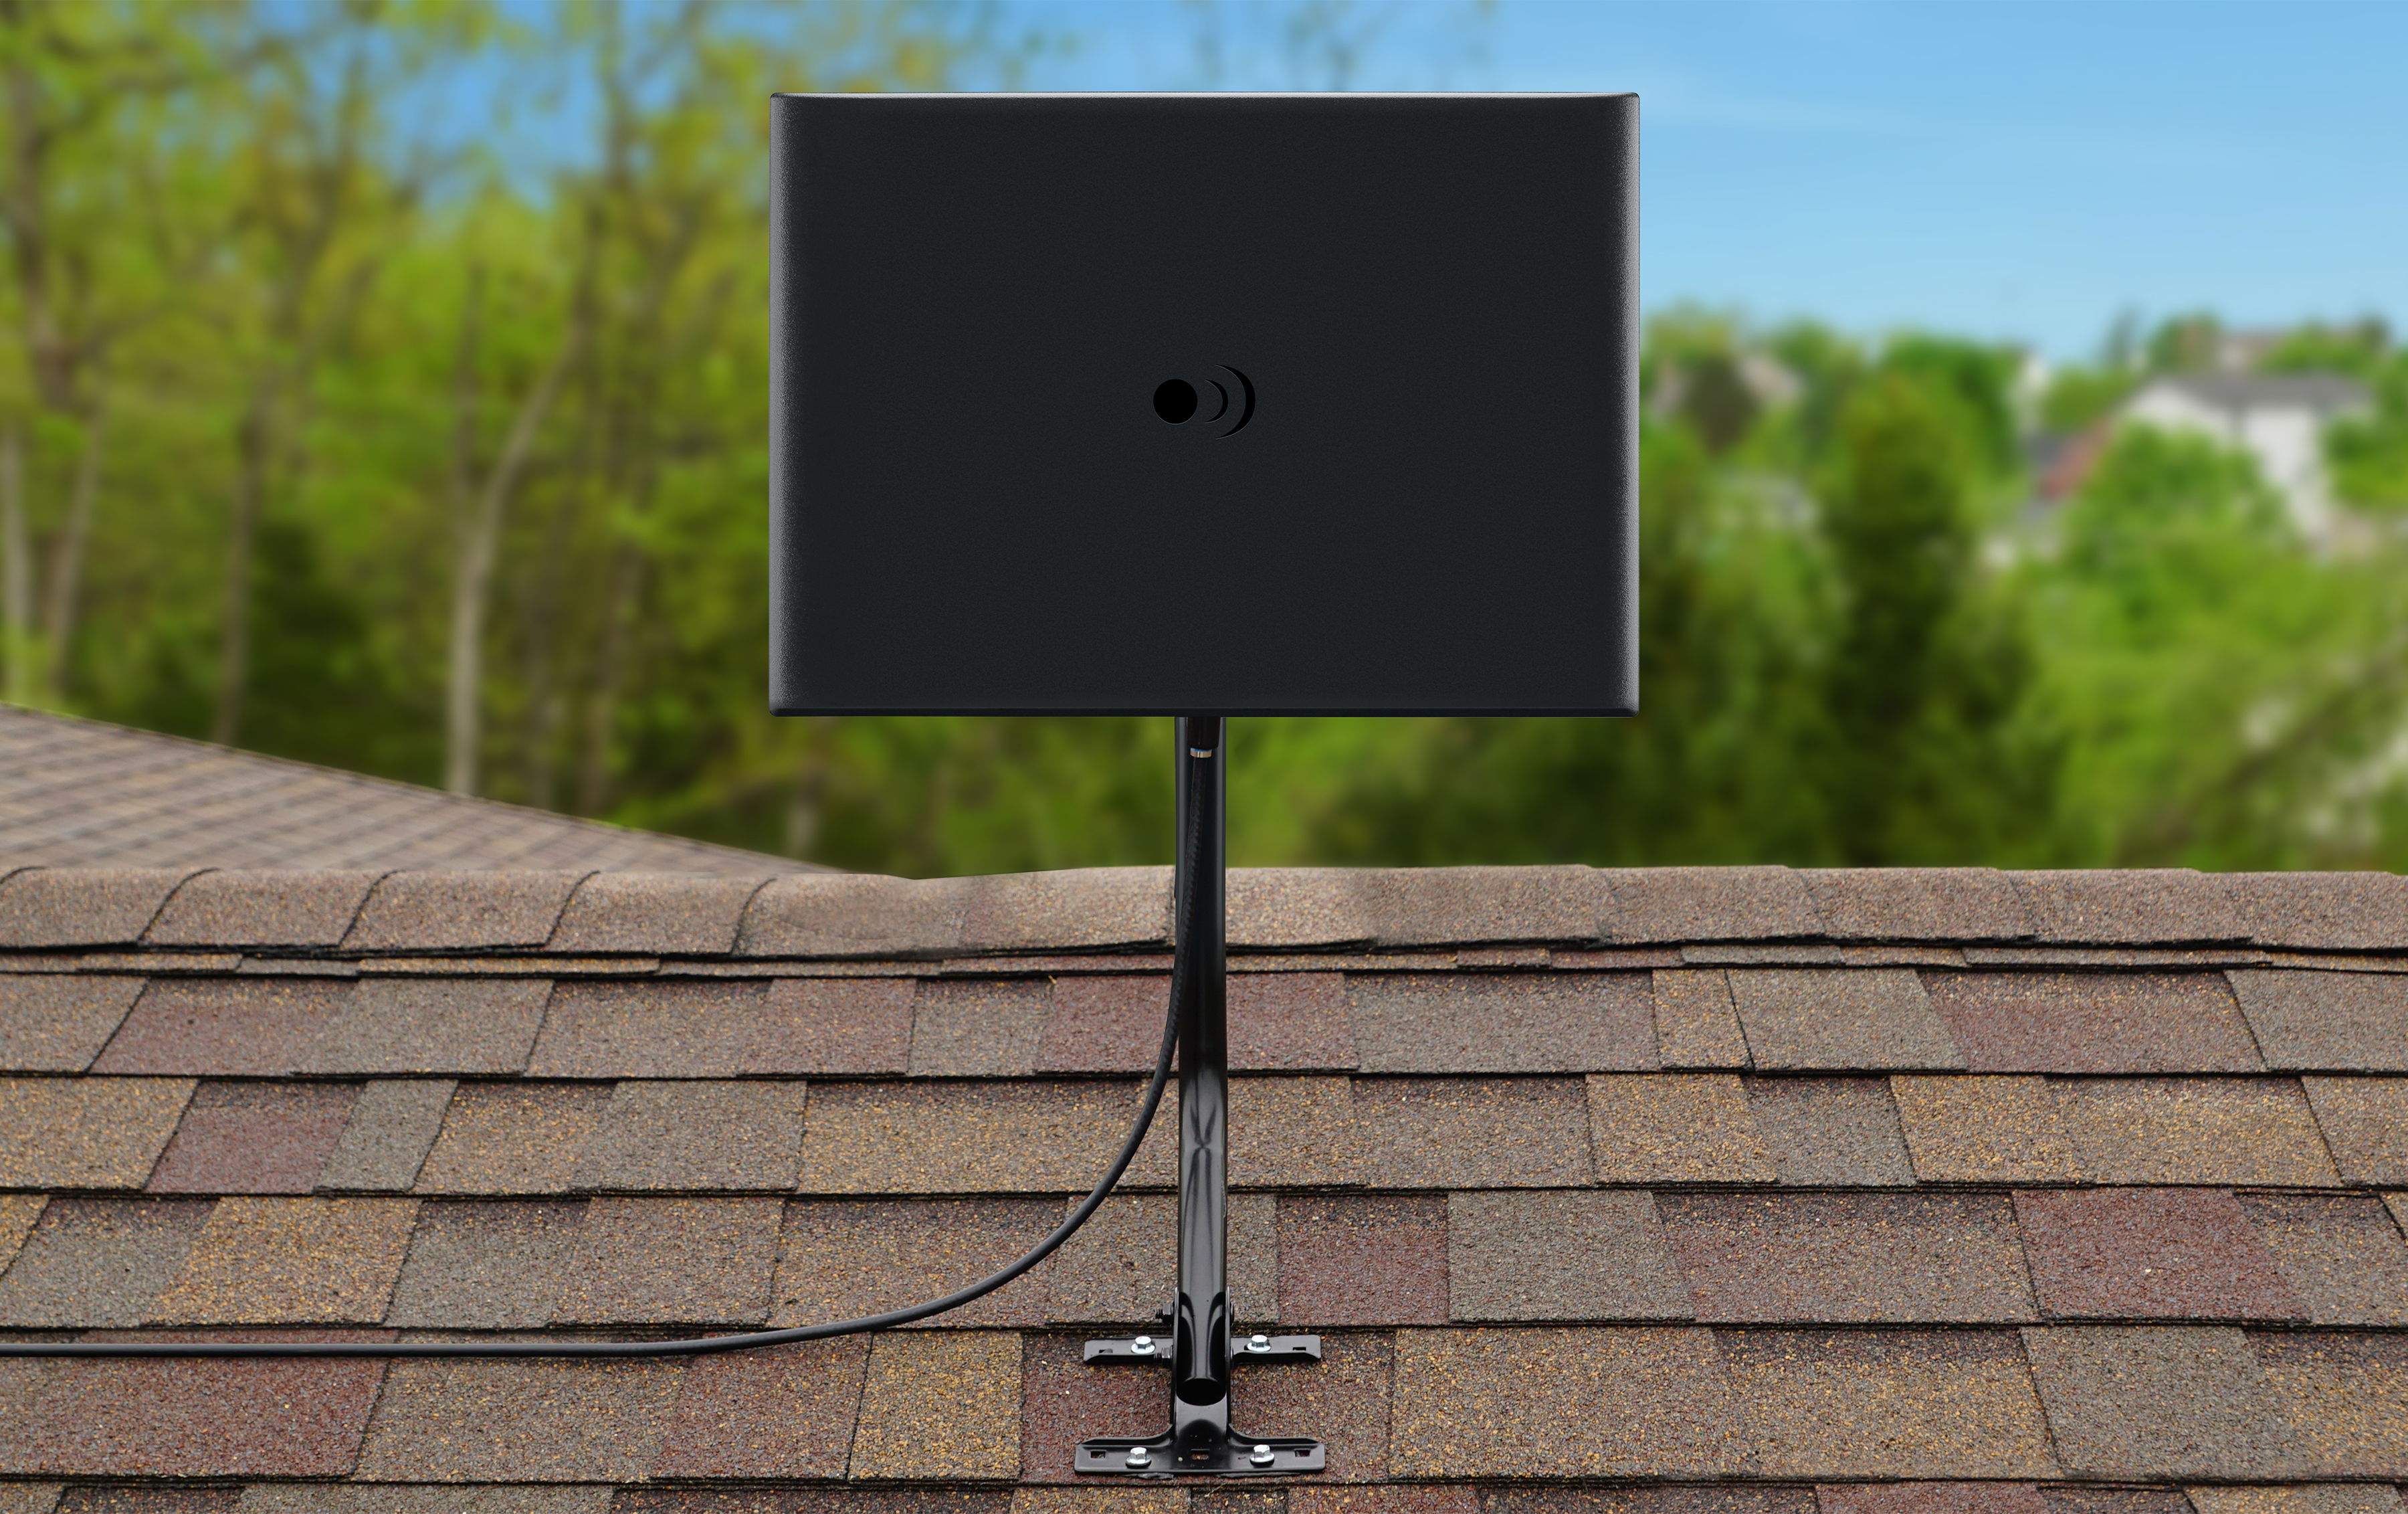 Results image of ClearStream Fusion Outdoor Antenna on top of man cave